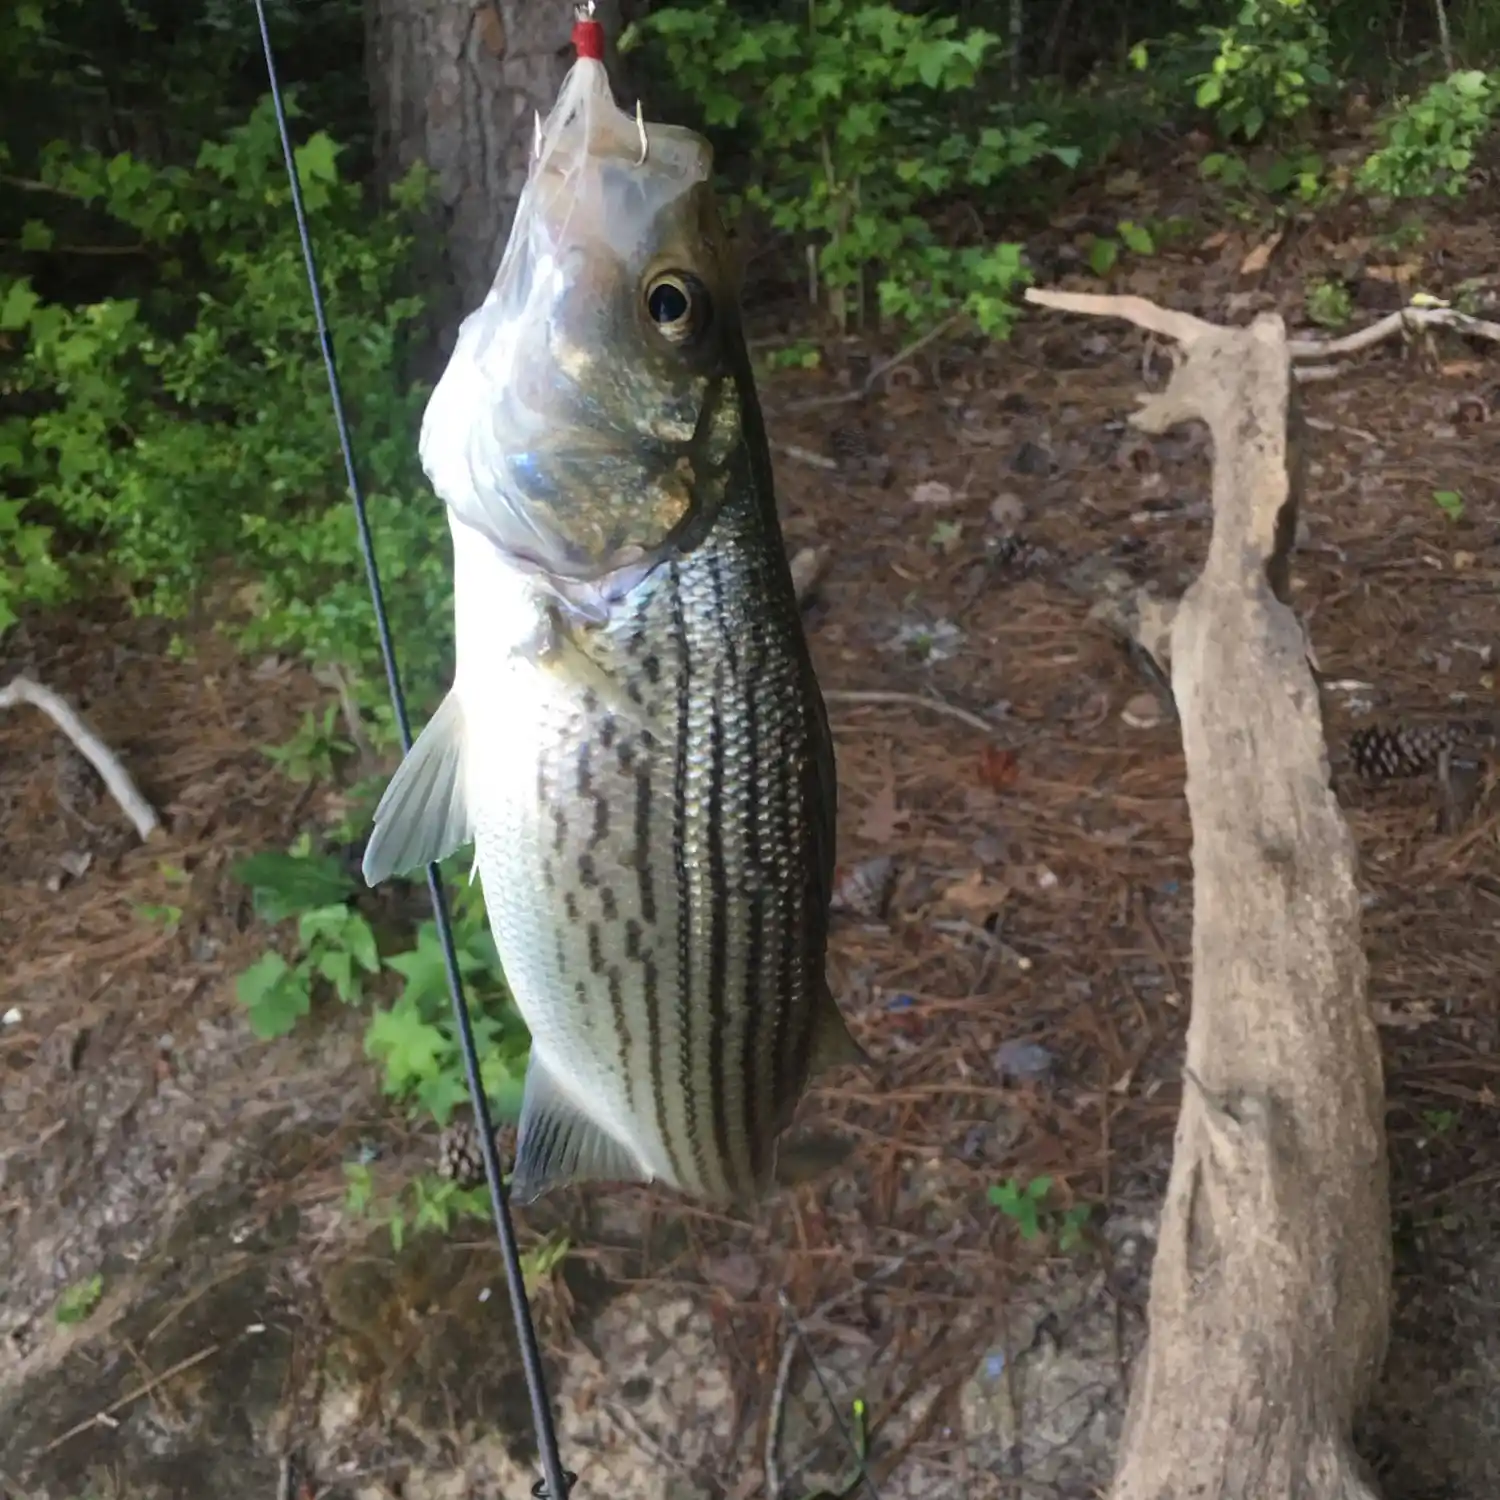 Wearing out Spotted Bass on the Saluda River - Buzzard's Roost to